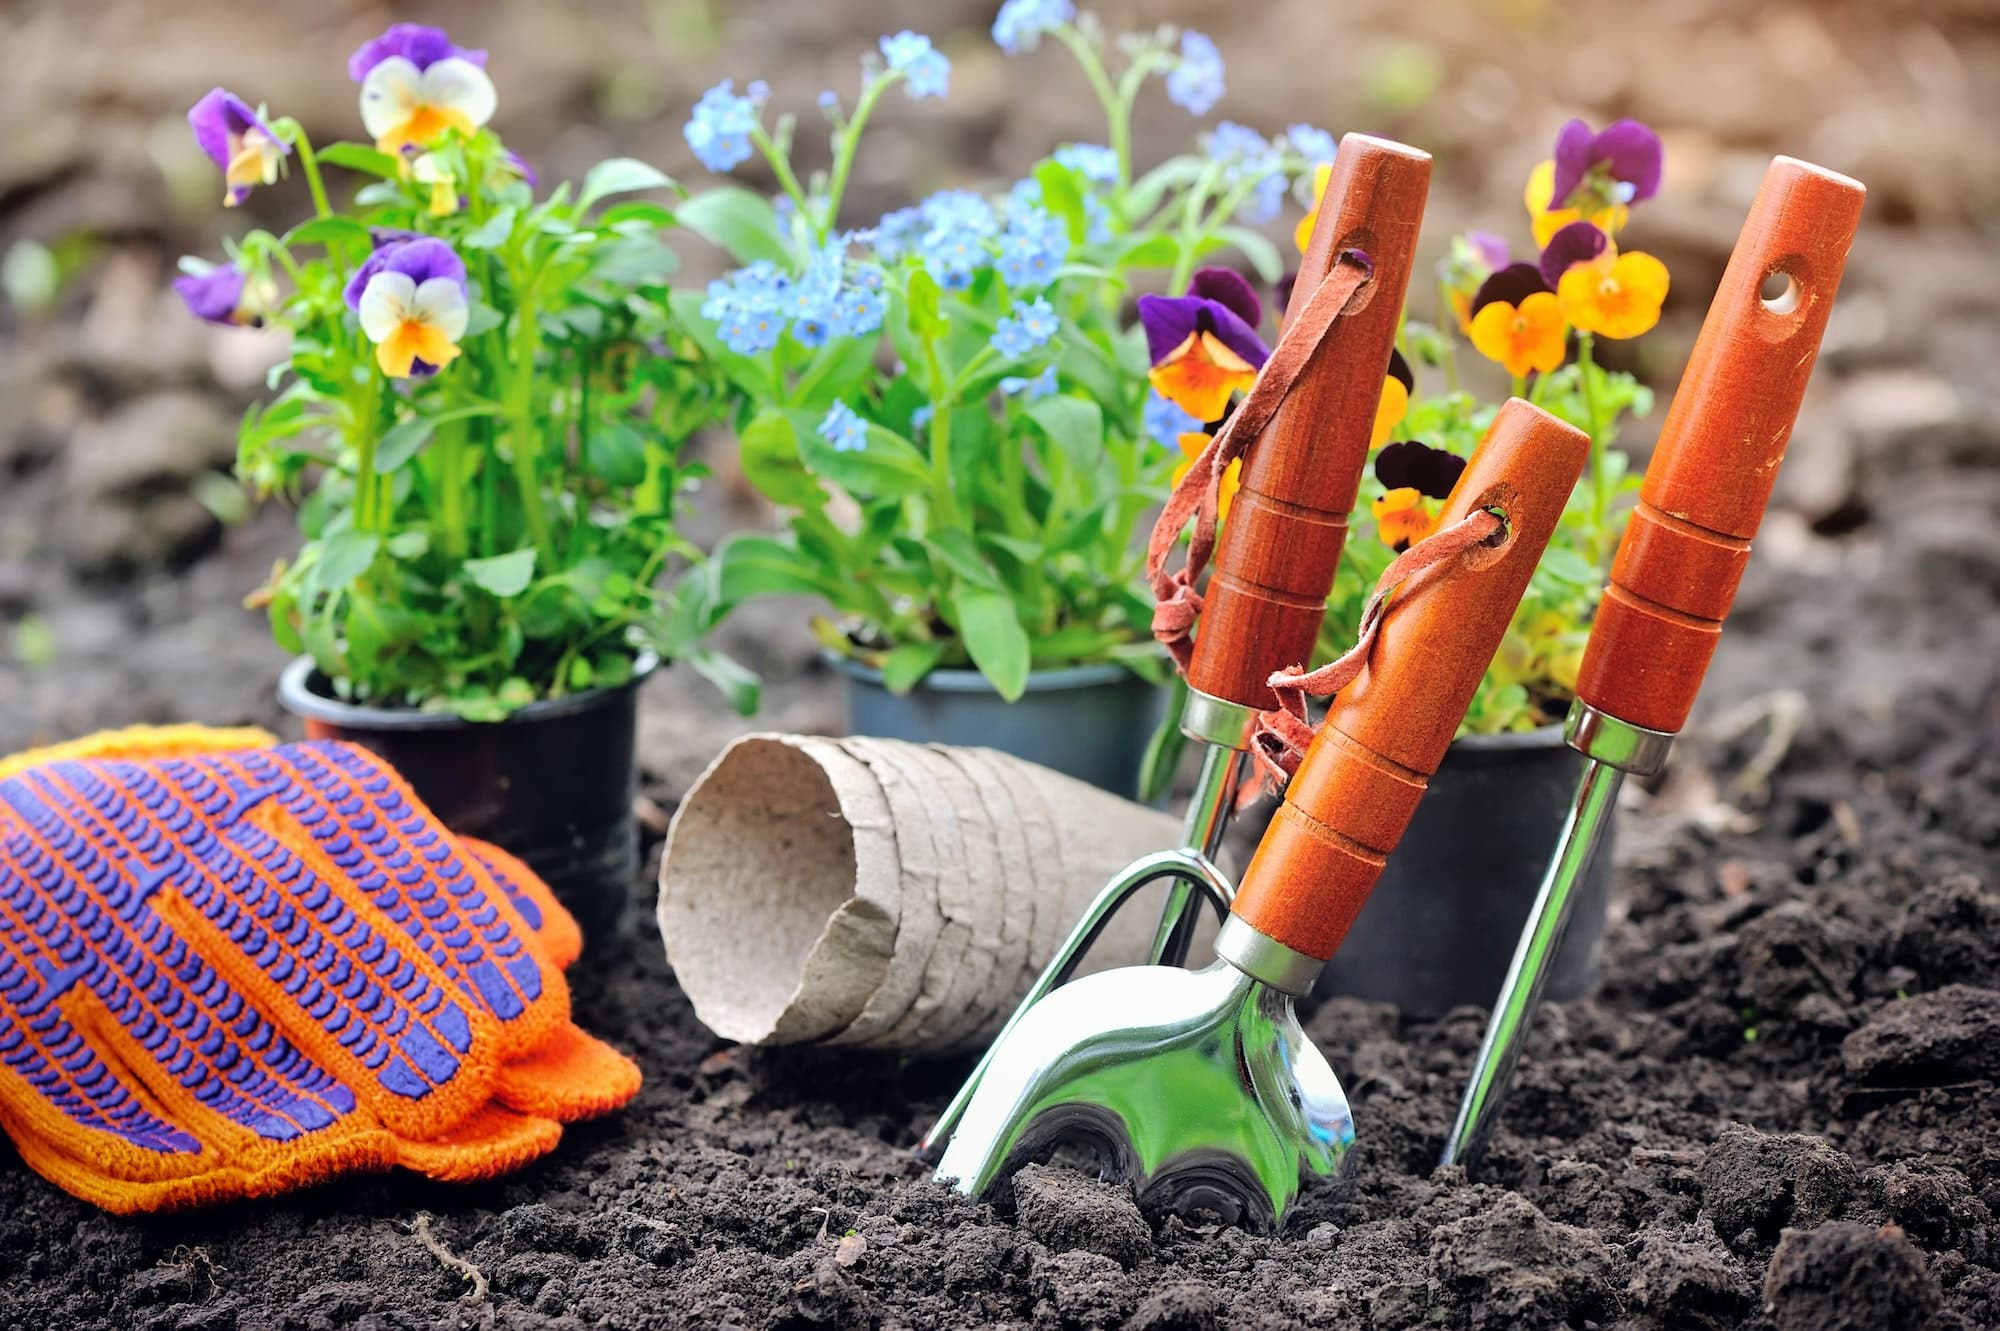 Gardening tools and spring flowers in the garden